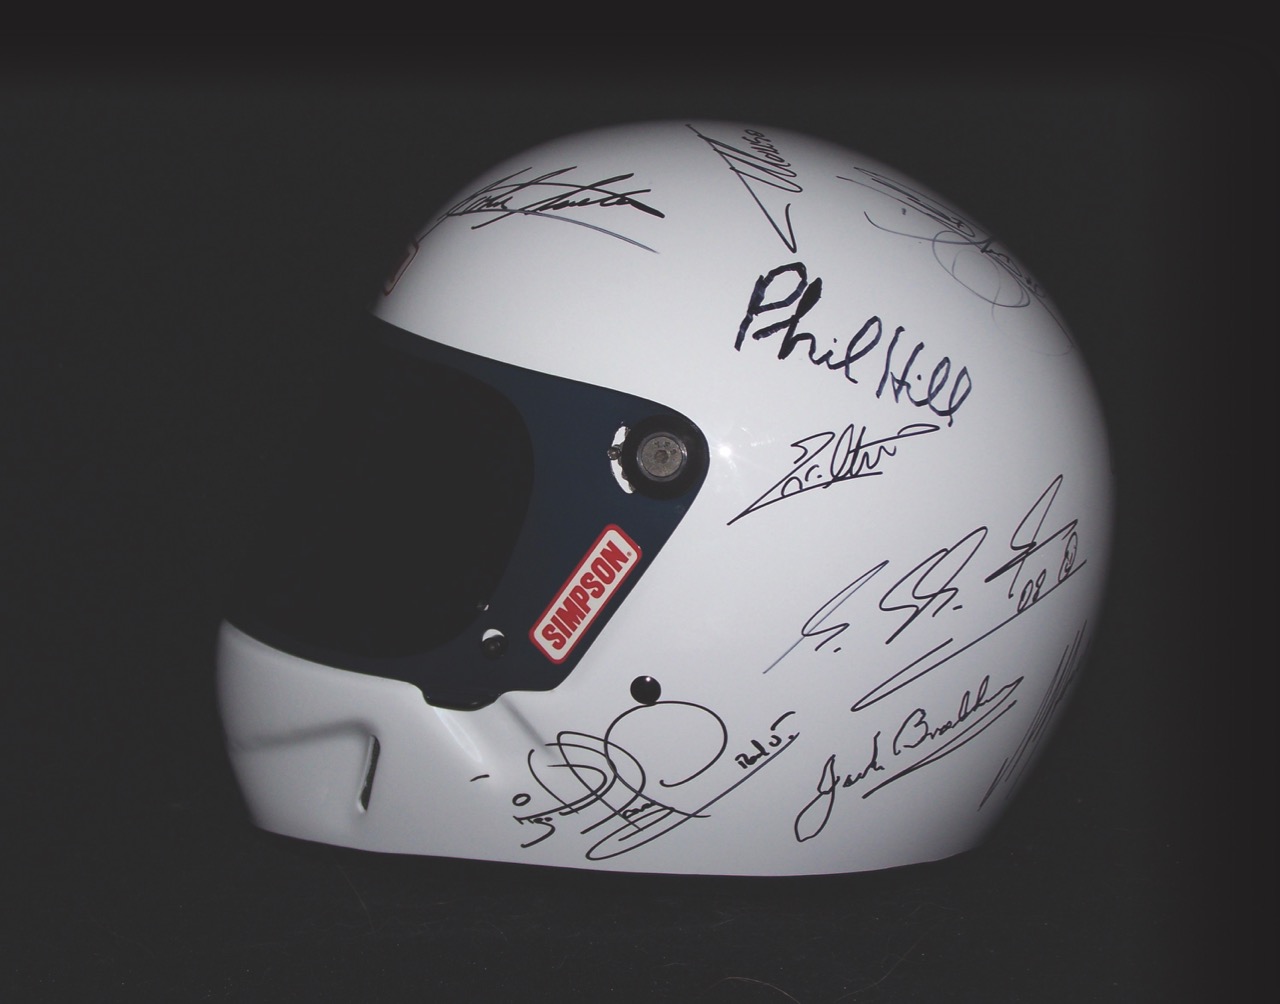 Helmet is autographed by every F1 champion alive since 2007 | RM Sotheby's photo